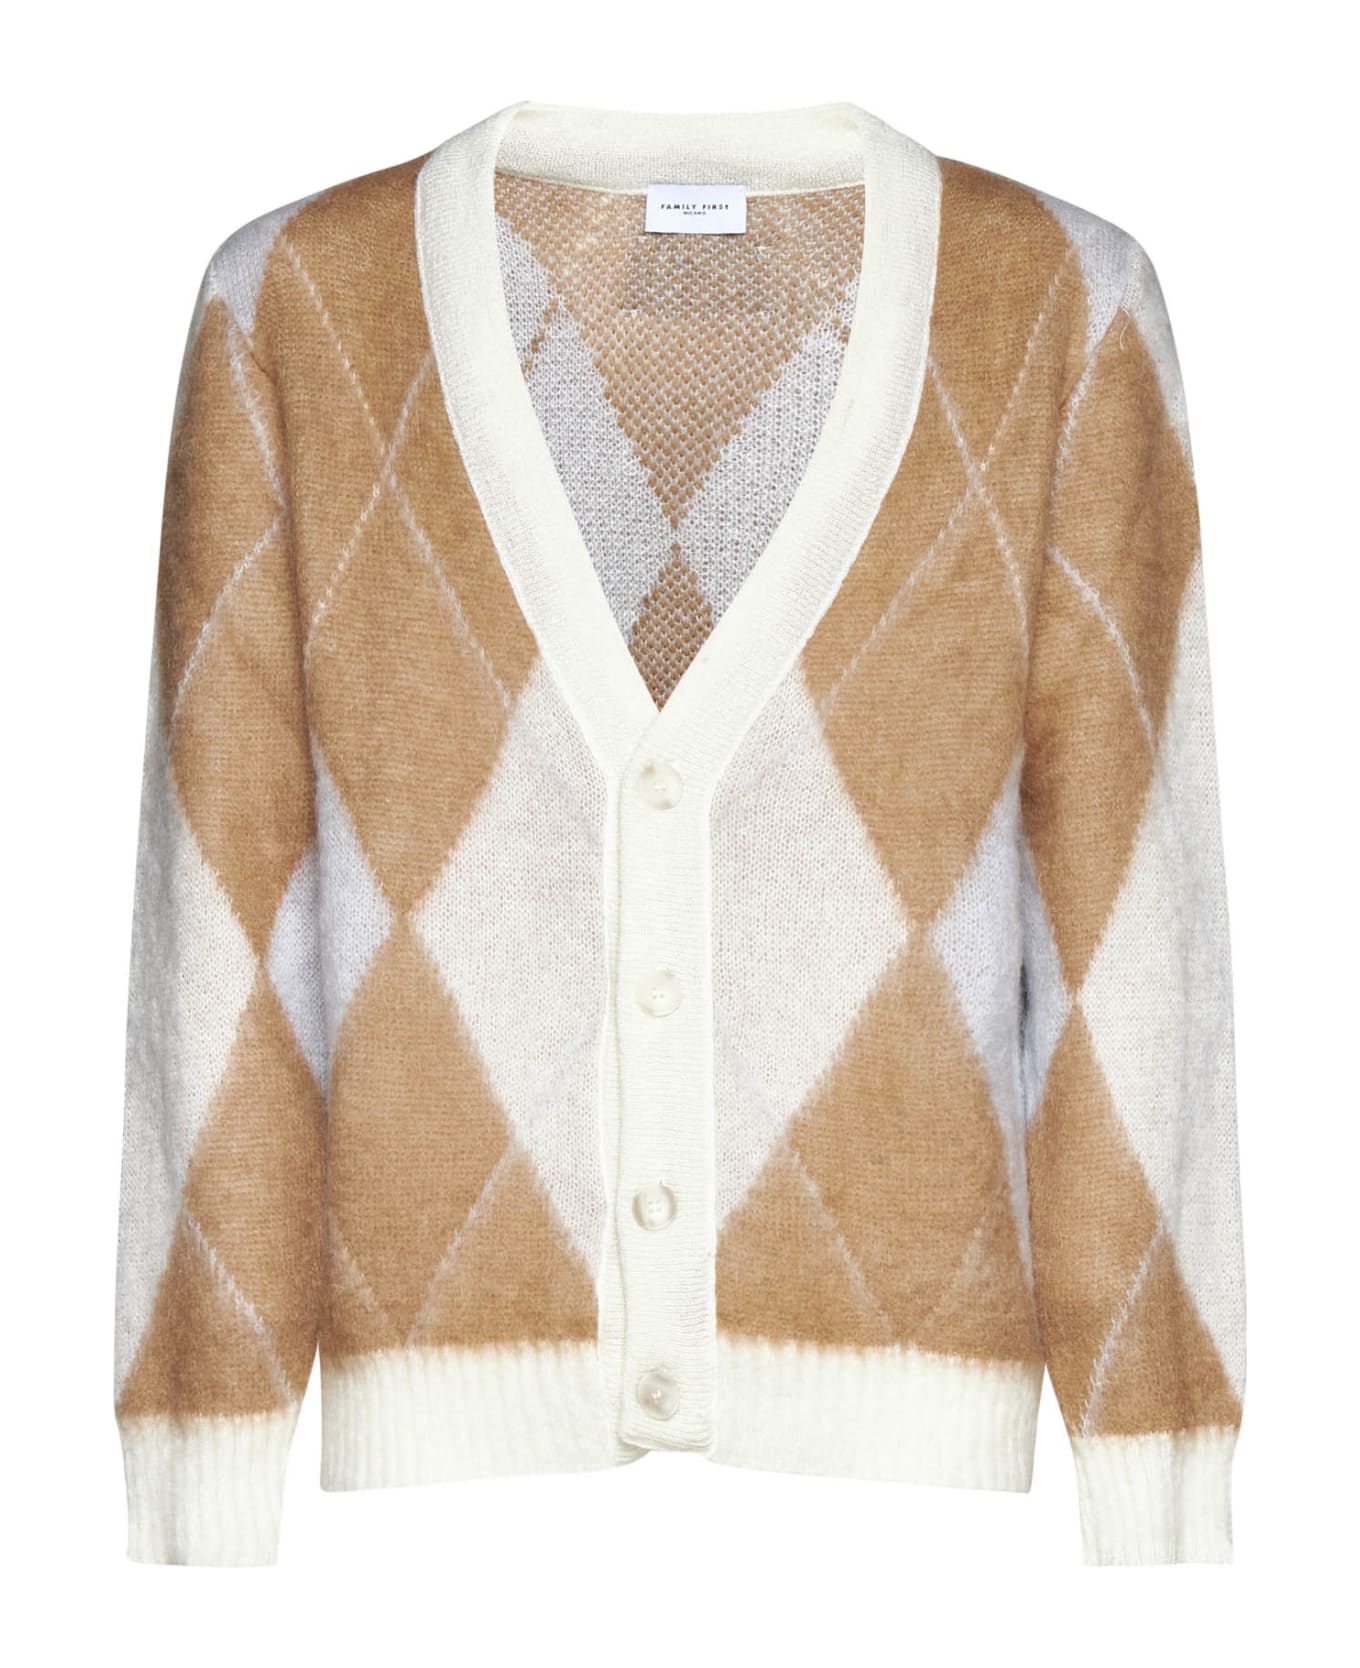 Family First Milano Cardigan - Beige